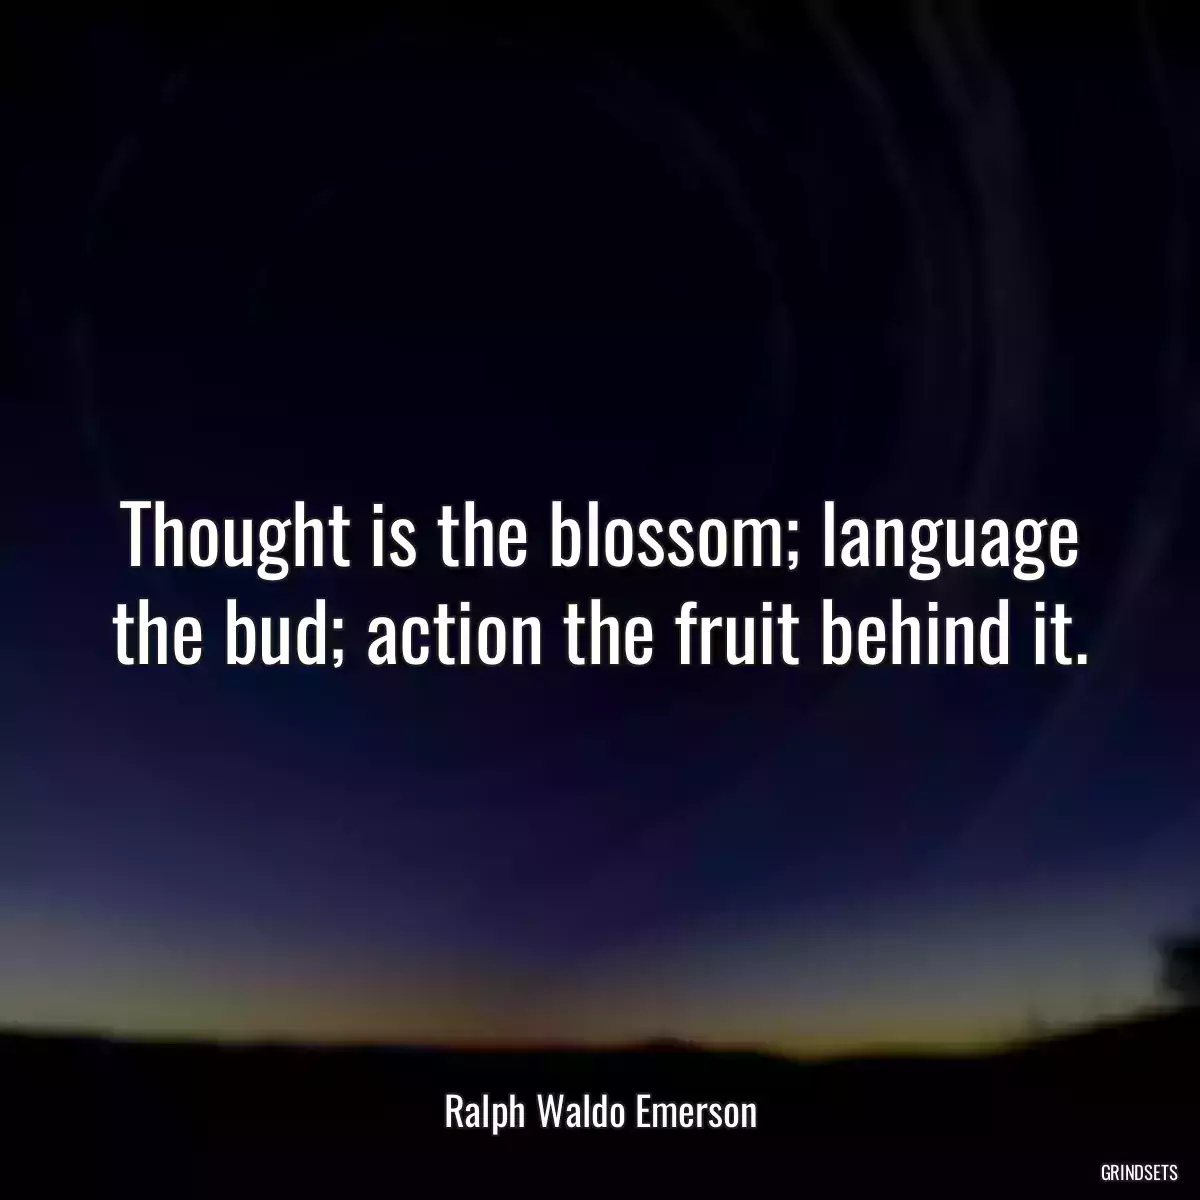 Thought is the blossom; language the bud; action the fruit behind it.